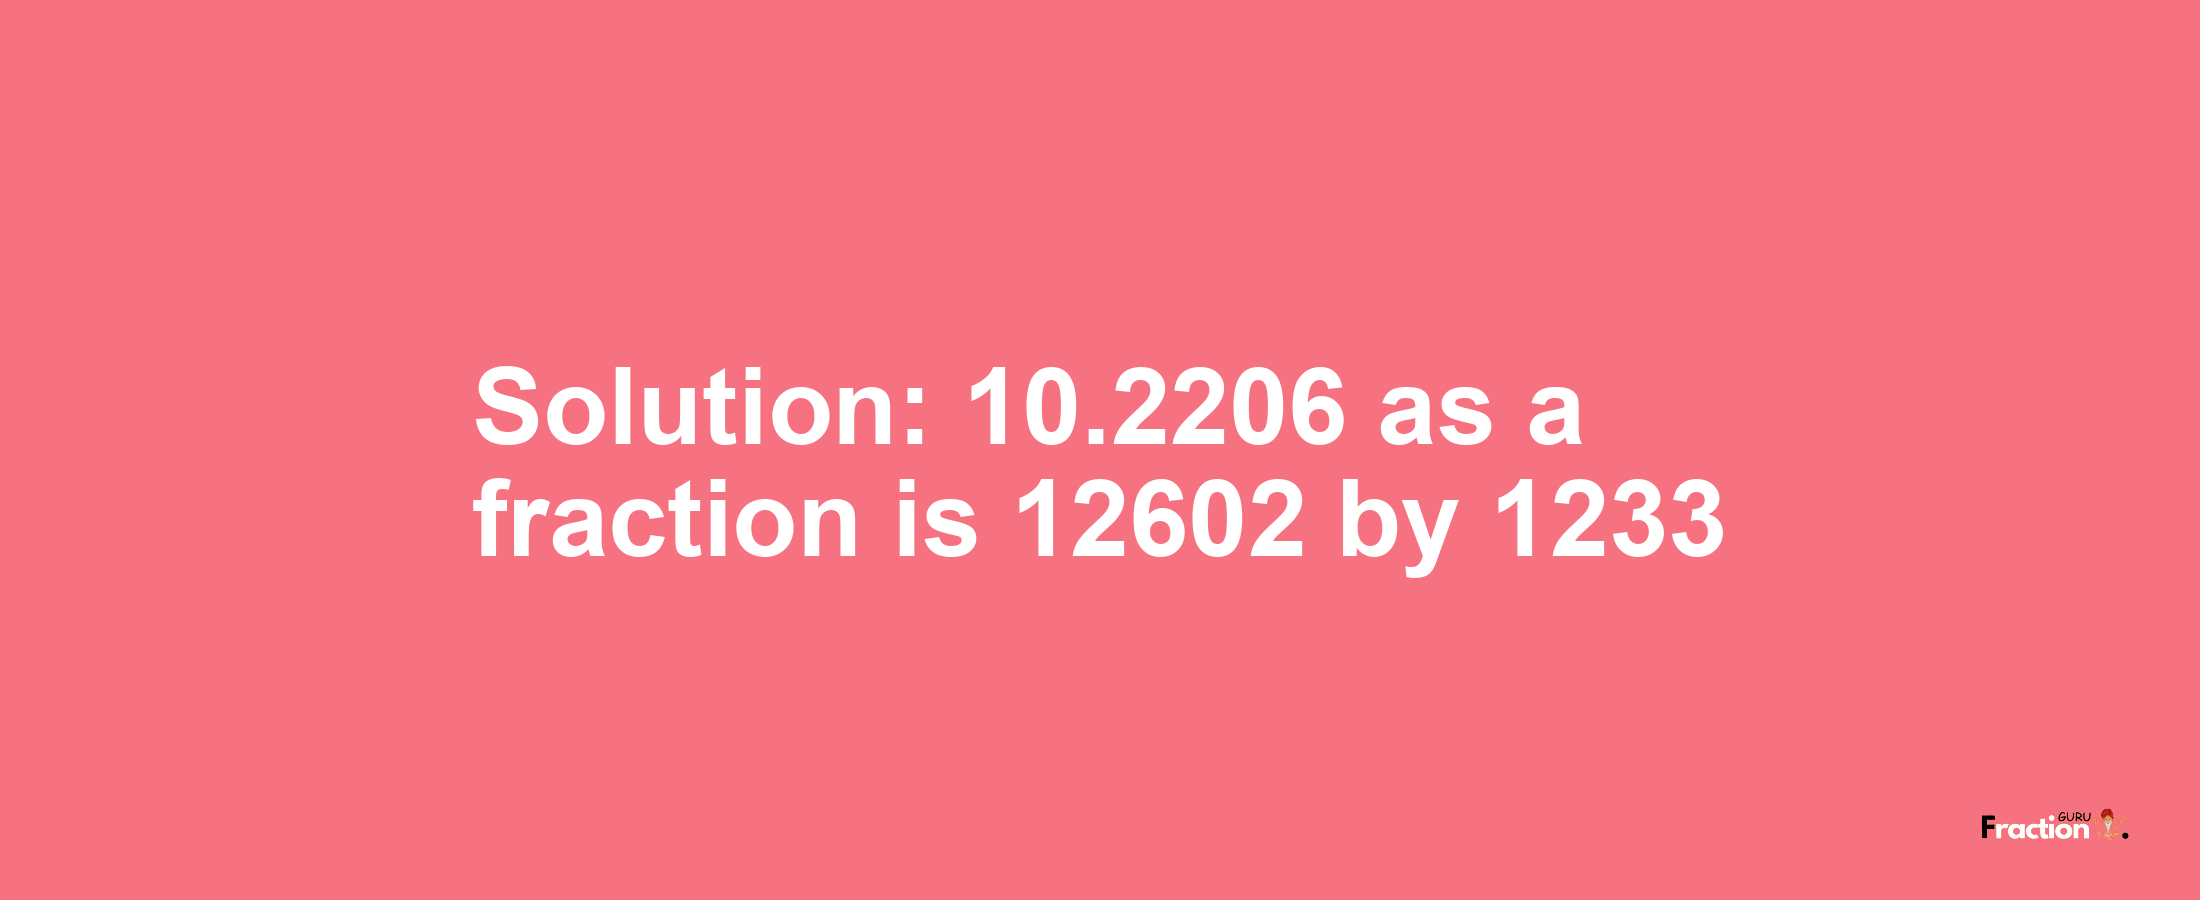 Solution:10.2206 as a fraction is 12602/1233